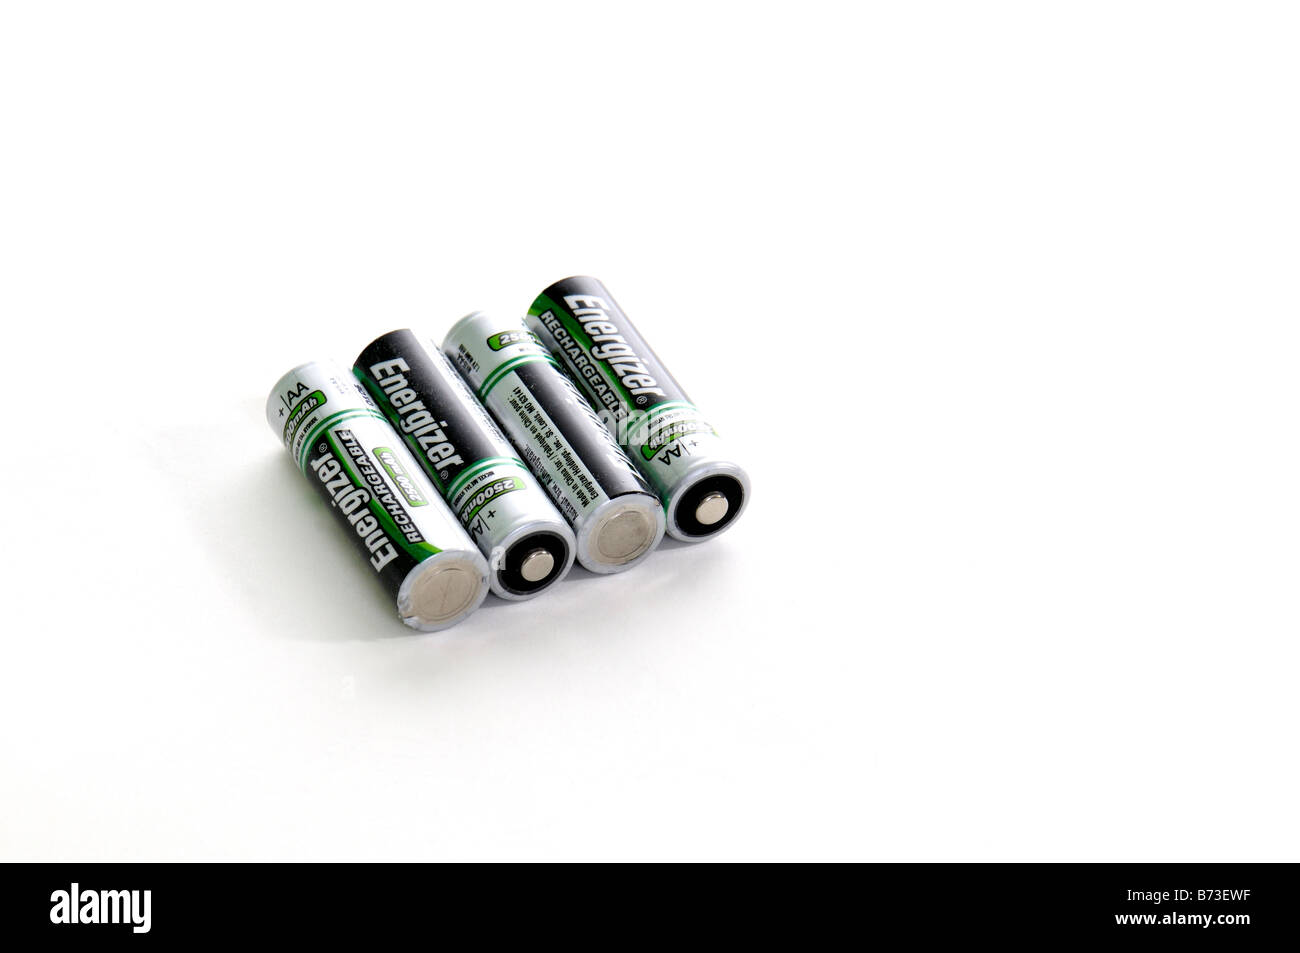 ✓ Piles rechargeables Duracell NiHM AA LR6 1.2V 2500mAh Ultra